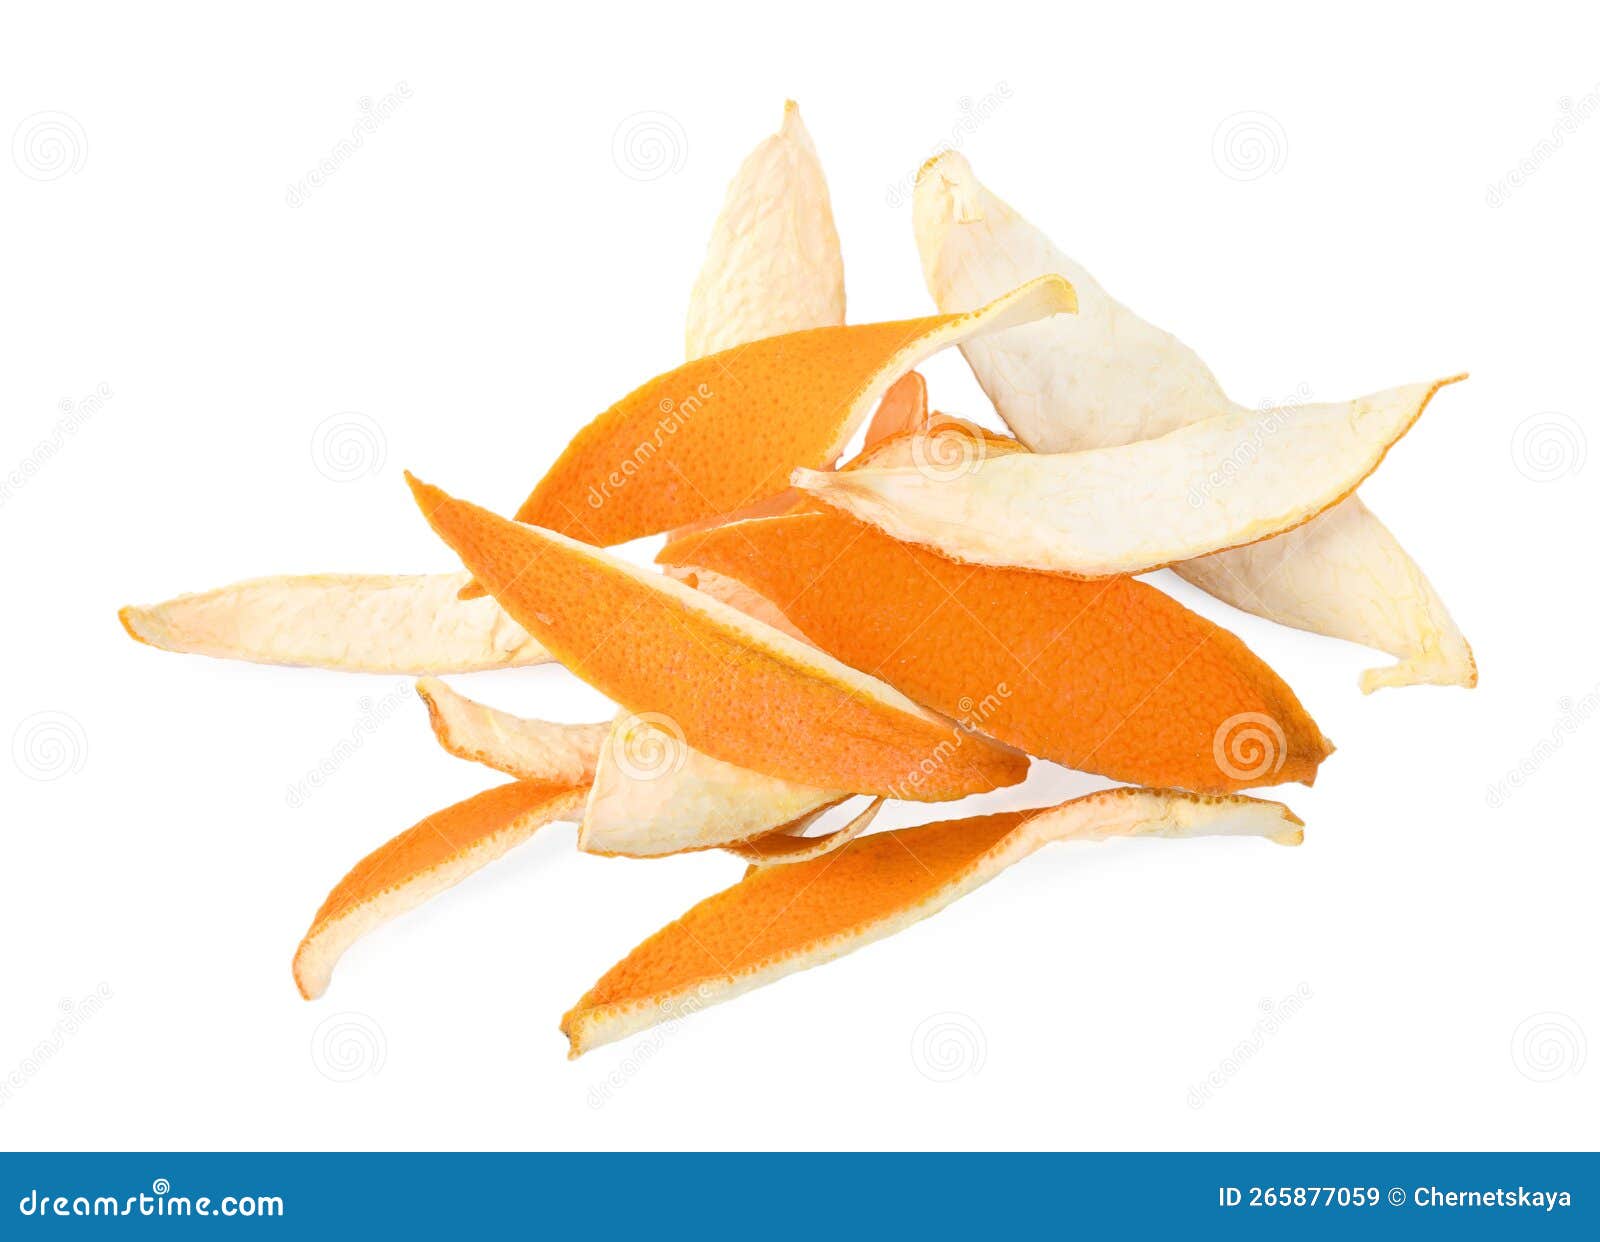 Pile Of Dry Orange Peels Isolated On White Top View Stock Image